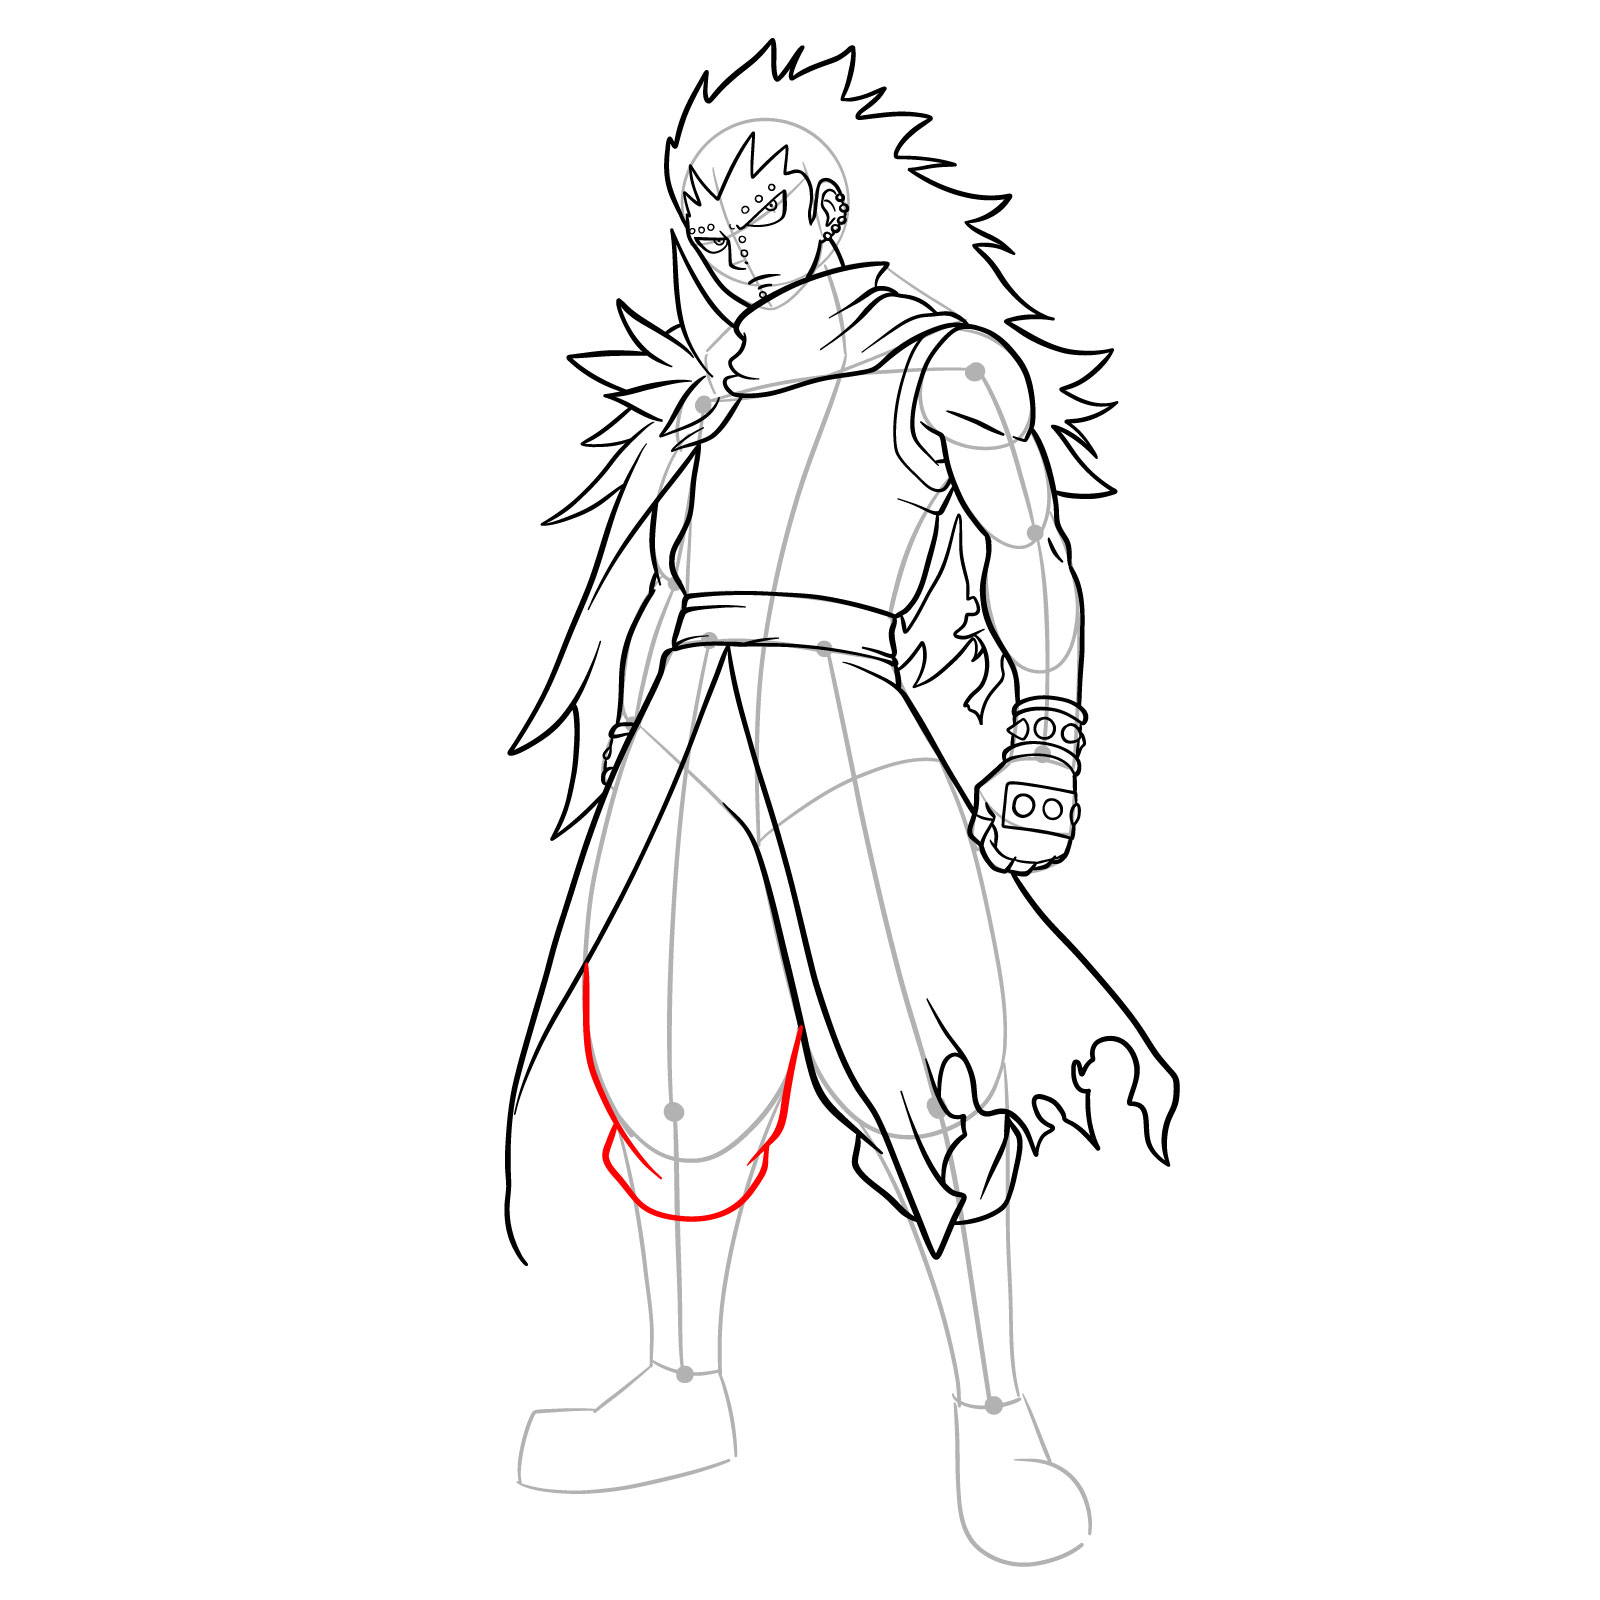 How to draw Gajeel Redfox from Fairy Tail - step 32